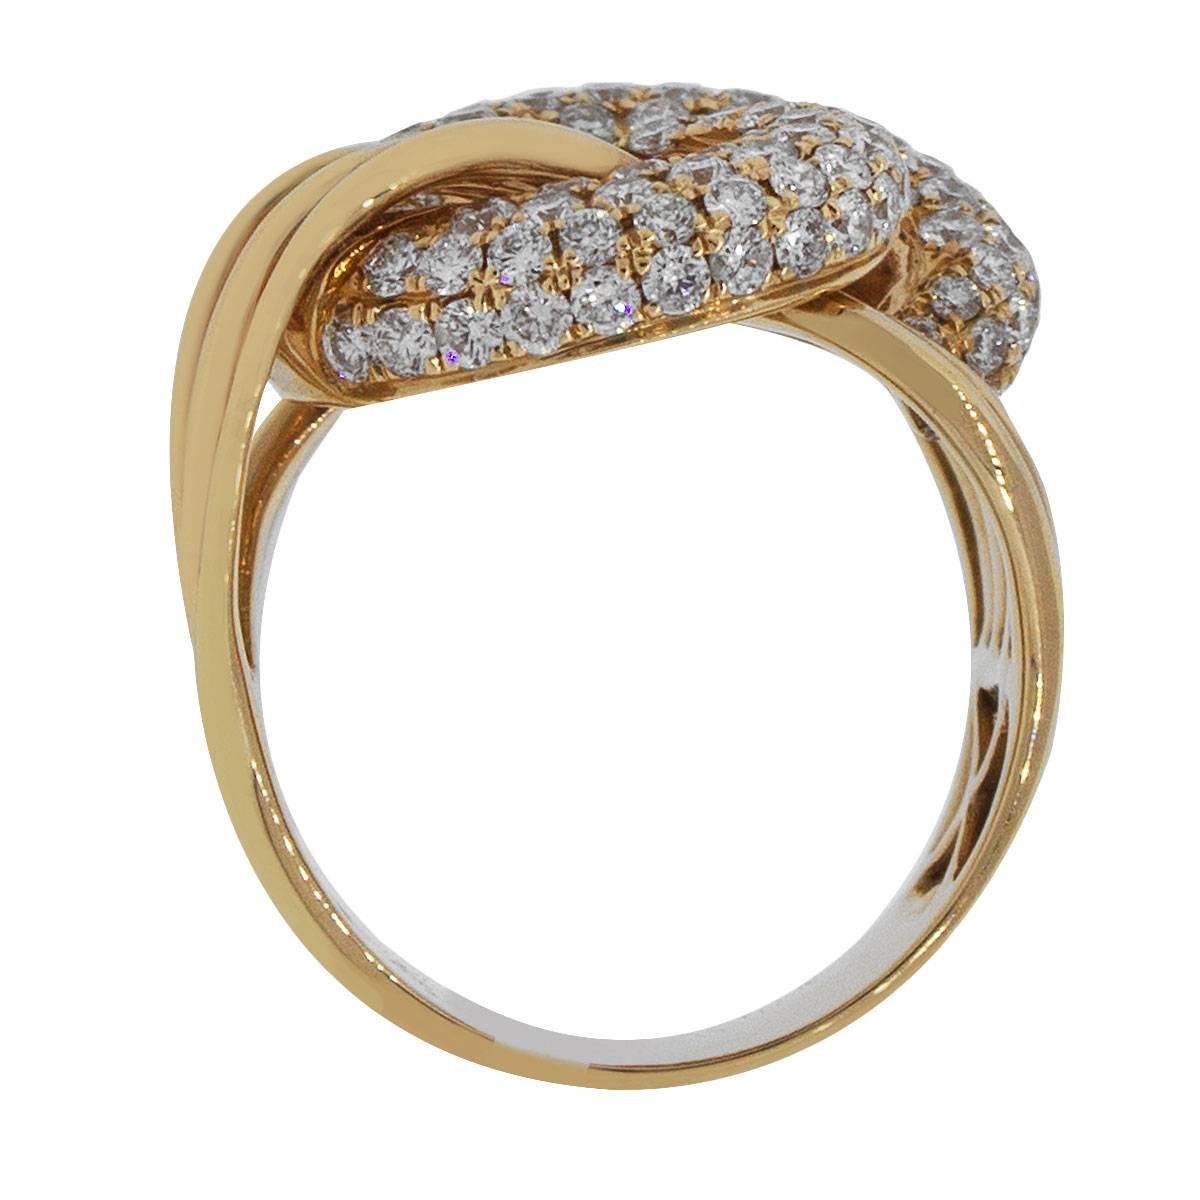 Material: 18k rose gold
Diamond Details: Approximately 2ctw of round brilliant diamonds. Diamonds are G/H in color and VS in clarity
Ring Measurements: 0.75″ X 0.65″ X 0.95″
Ring Size: 6.5
Total Weight: 11.6g (7.4dwt)
Additional Details: This item